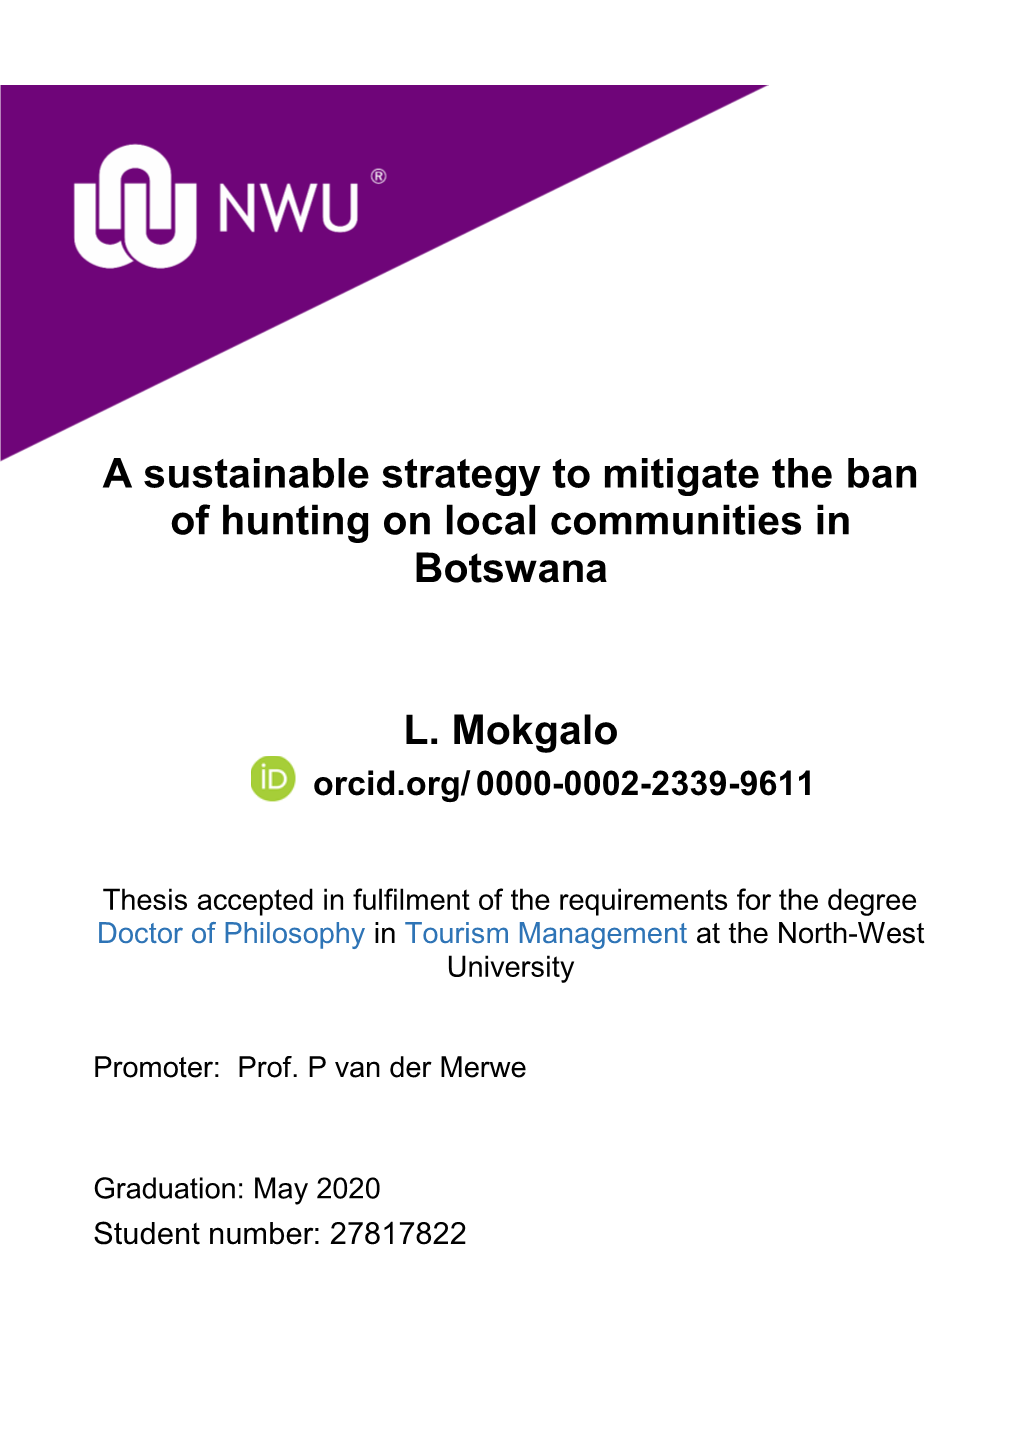 A Sustainable Strategy to Mitigate the Ban of Hunting on Local Communities in Botswana